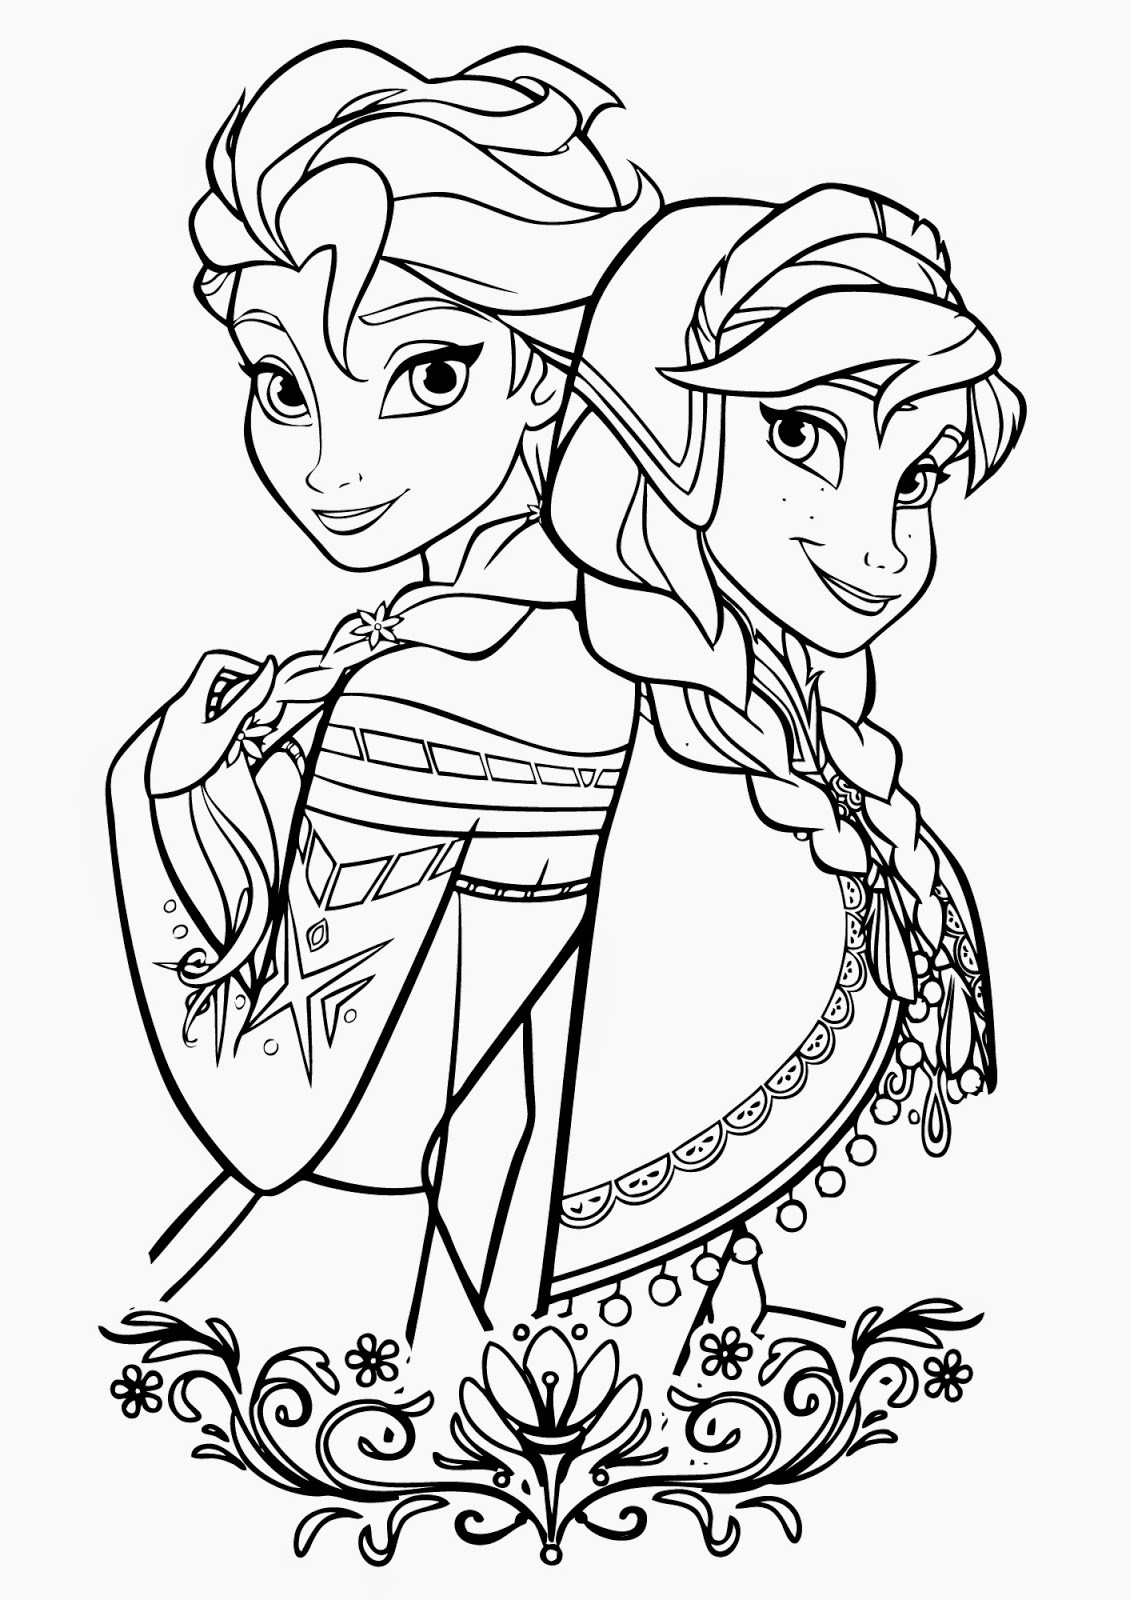 Frozen Coloring Book
 disney frozen olaf coloring pages